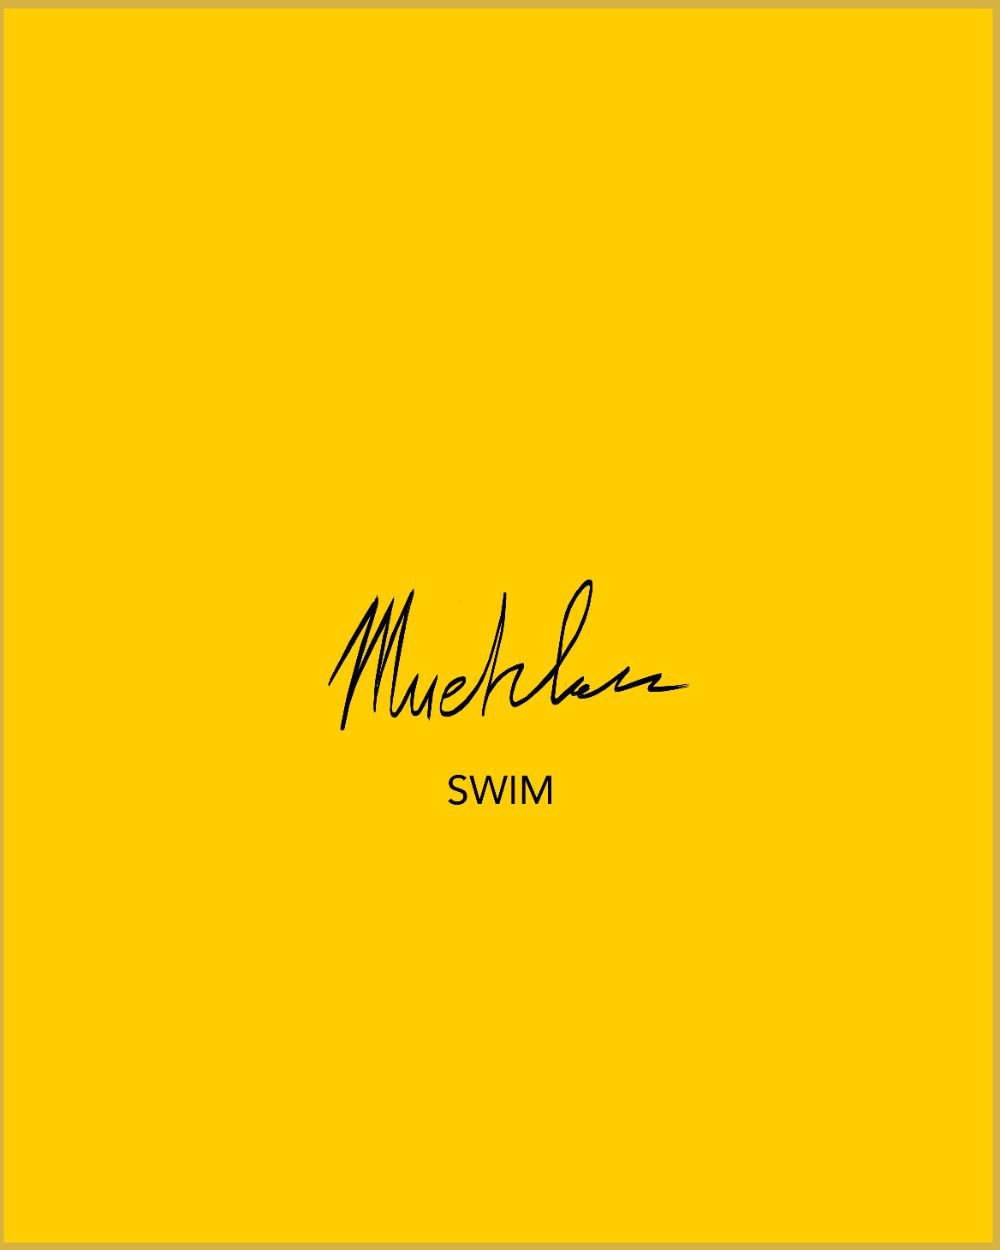 New Muehleder Swim launches this Saturday, March 10, at noon Eastern